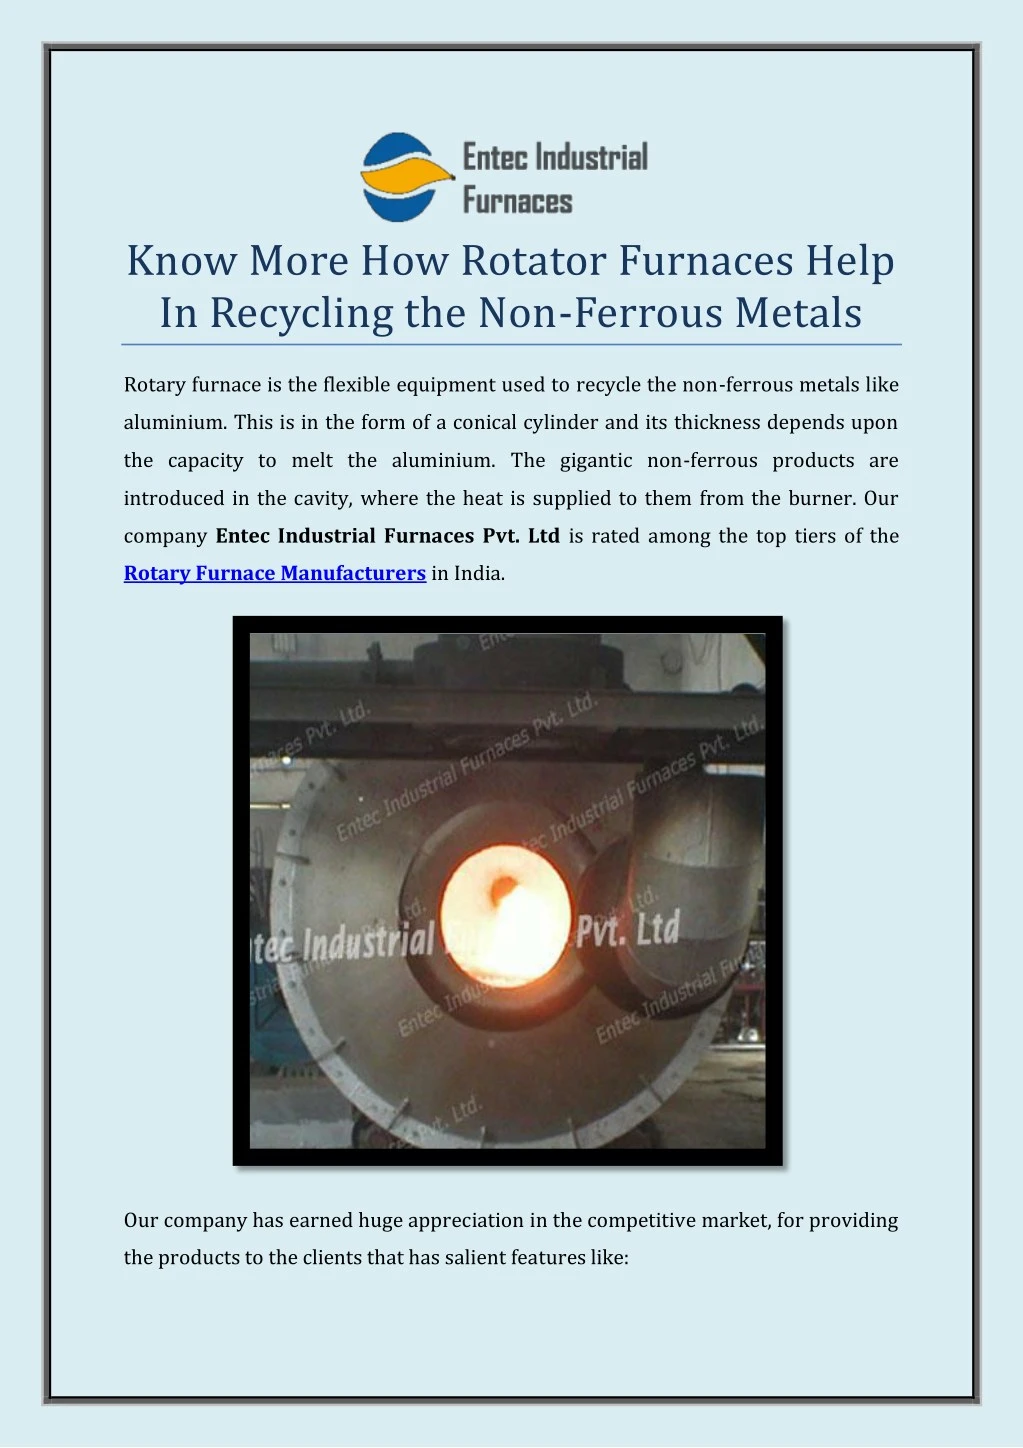 know more how rotator furnaces help in recycling